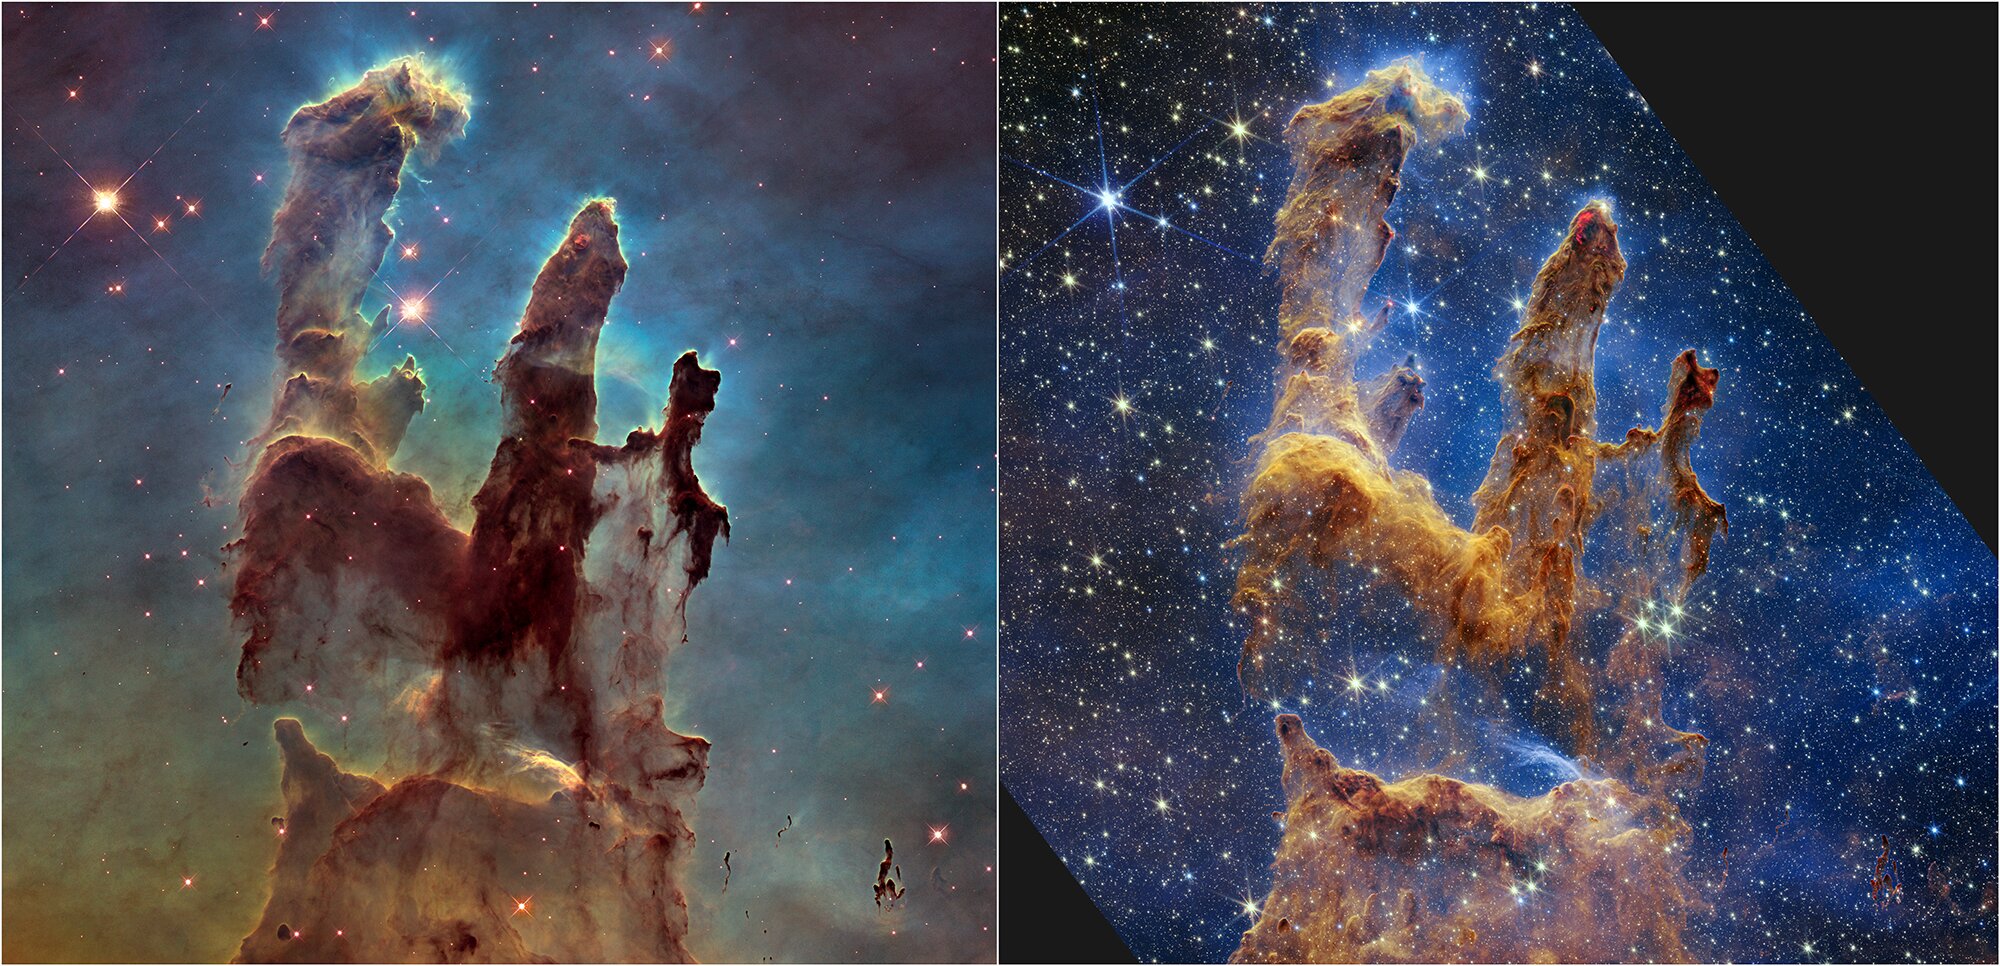 New Webb Image Captures the Iconic ‘Pillars of Creation’